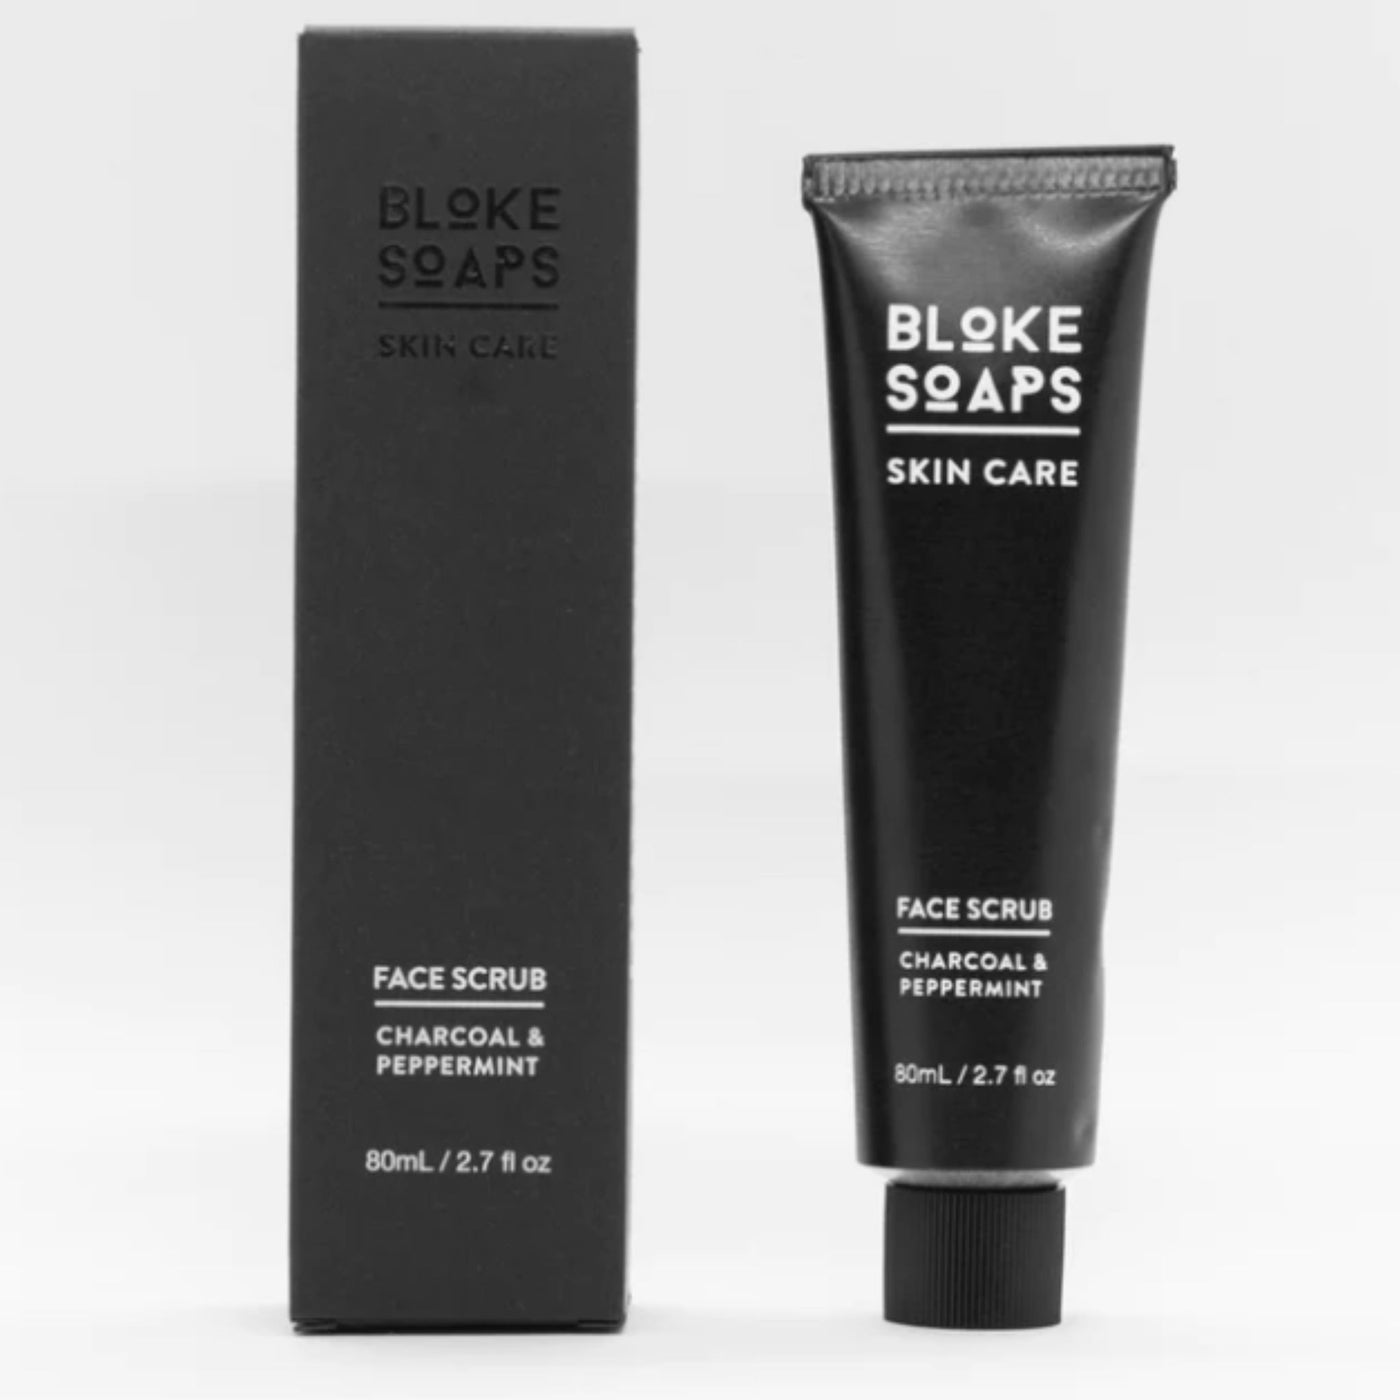 Blokes soaps Hands On Face Scrub